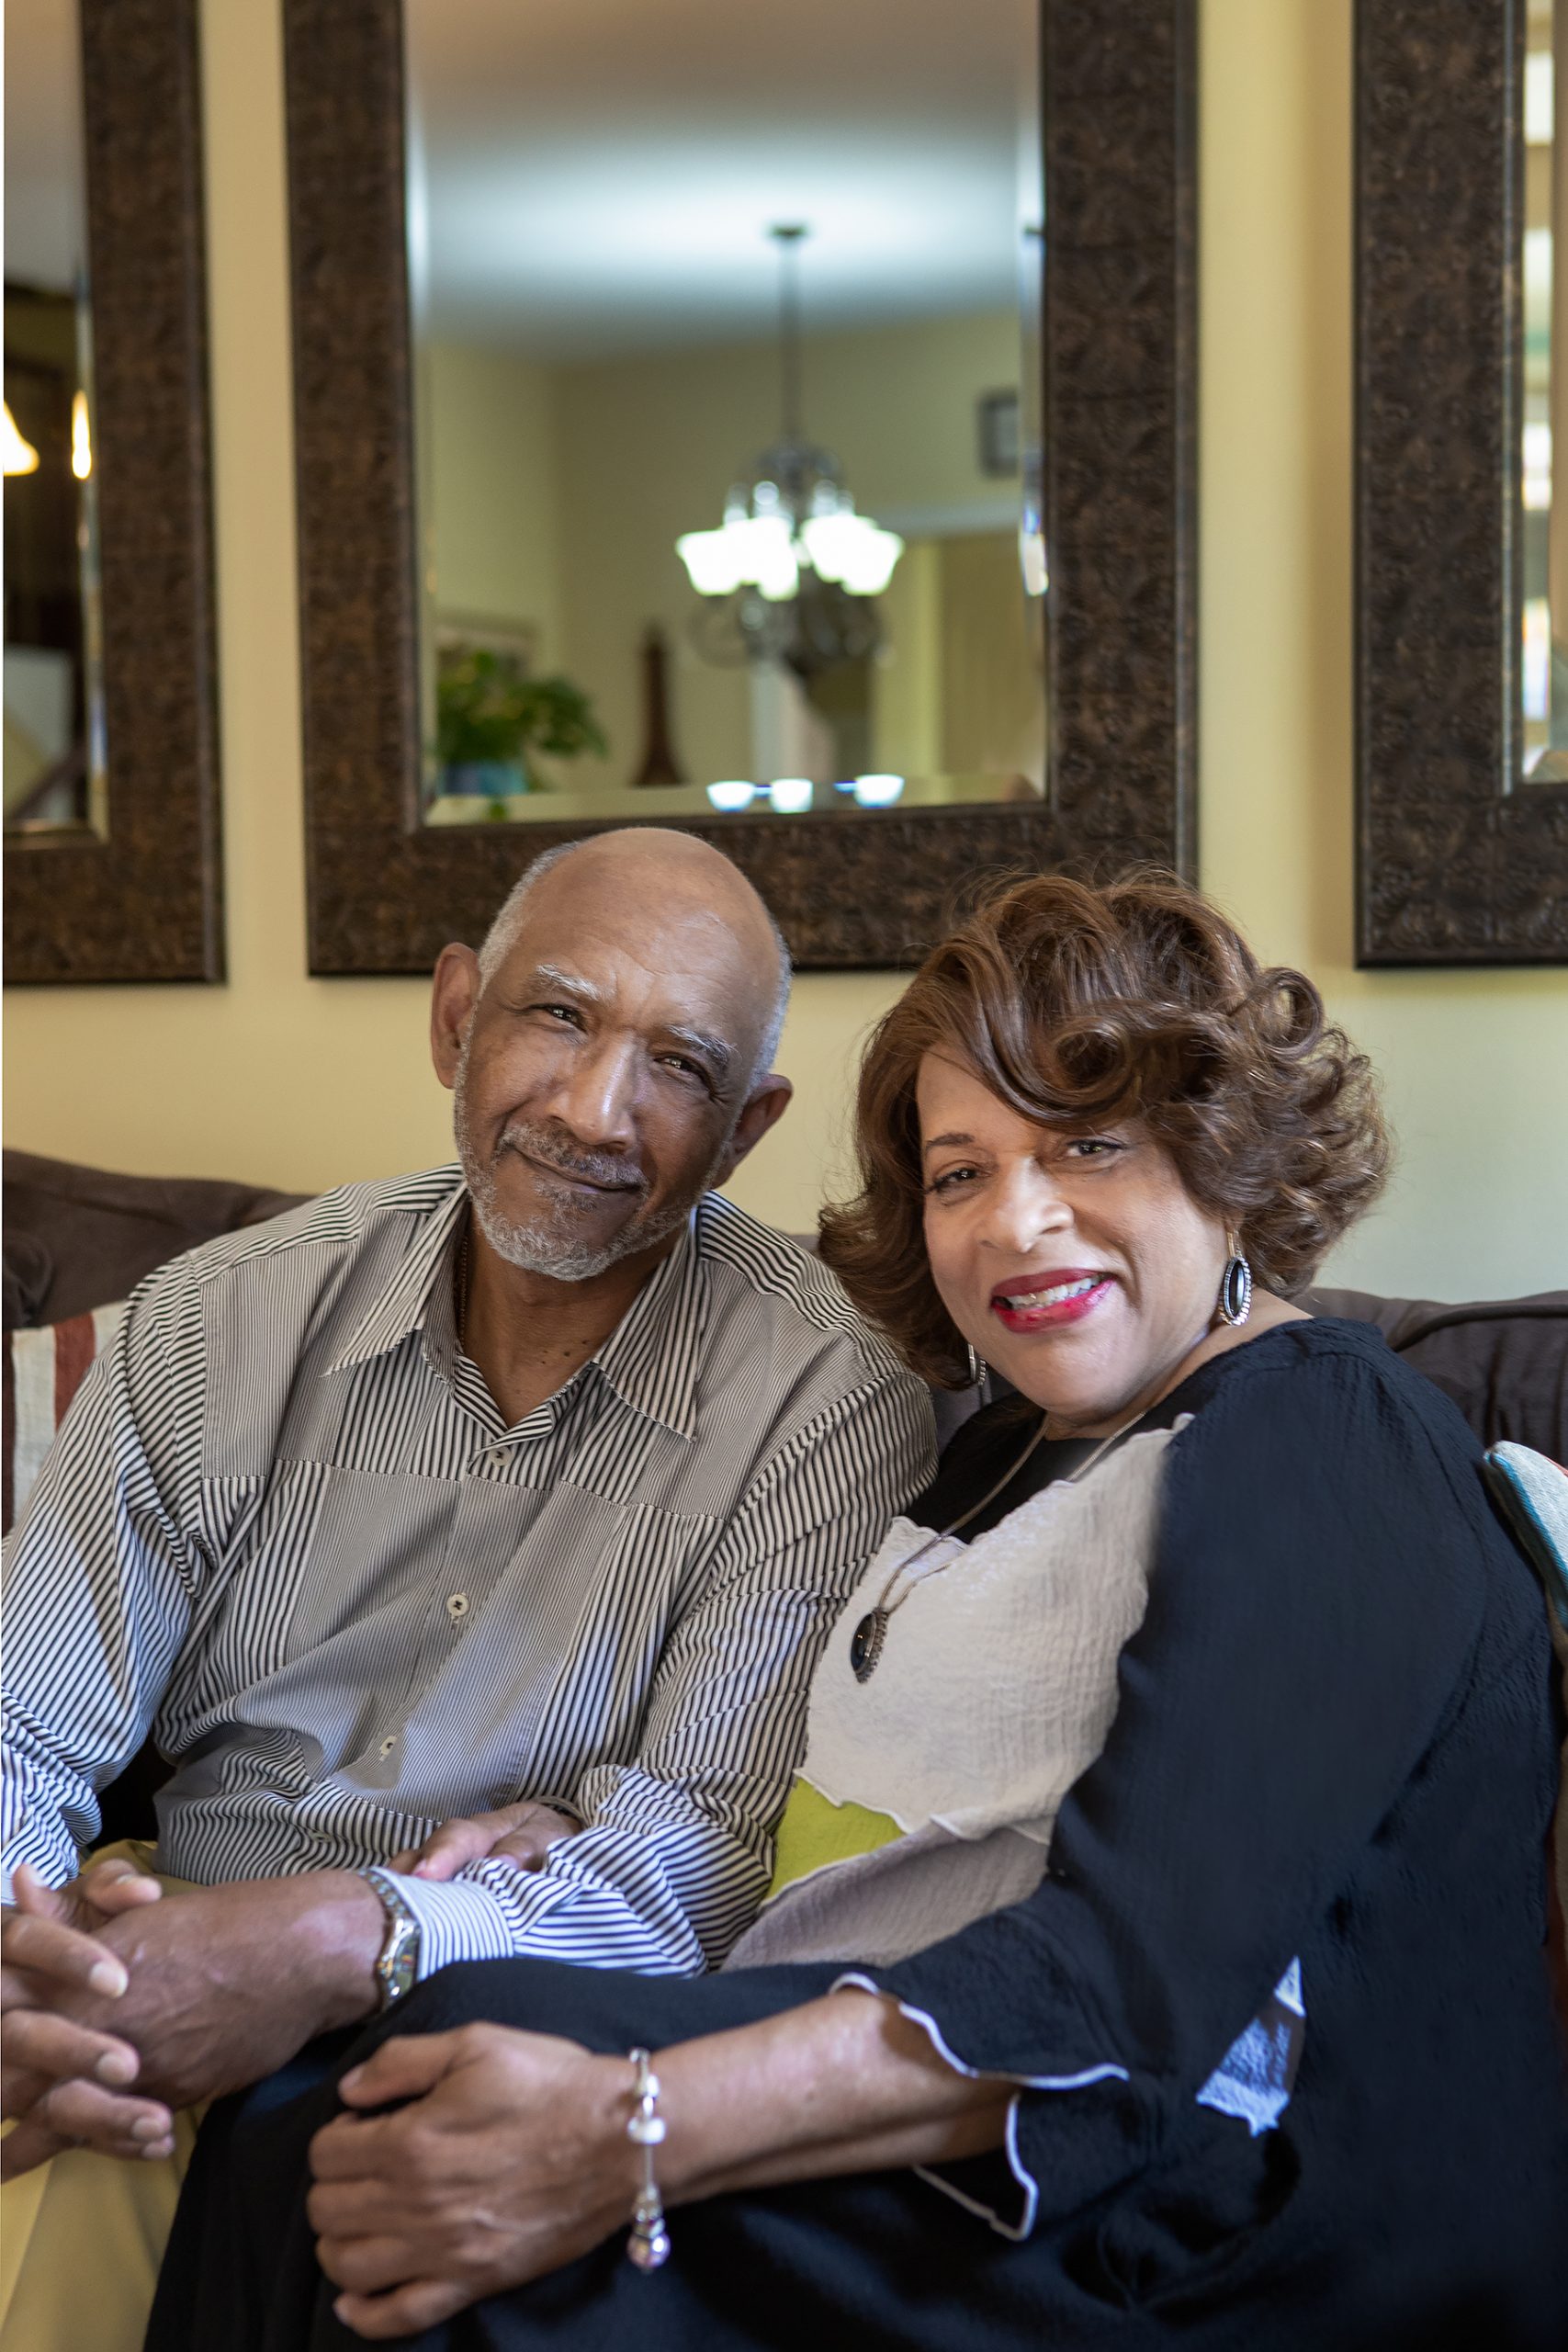 Oscar loves that he found the house for Sarah as he is the sales manager at S.C. Real Estate Exchange and a licensed real estate agent, after retiring as a sergeant major in the U.S. Army Reserves. Oscar and Sarah enjoy conversation and fellowship in their beautiful home.
